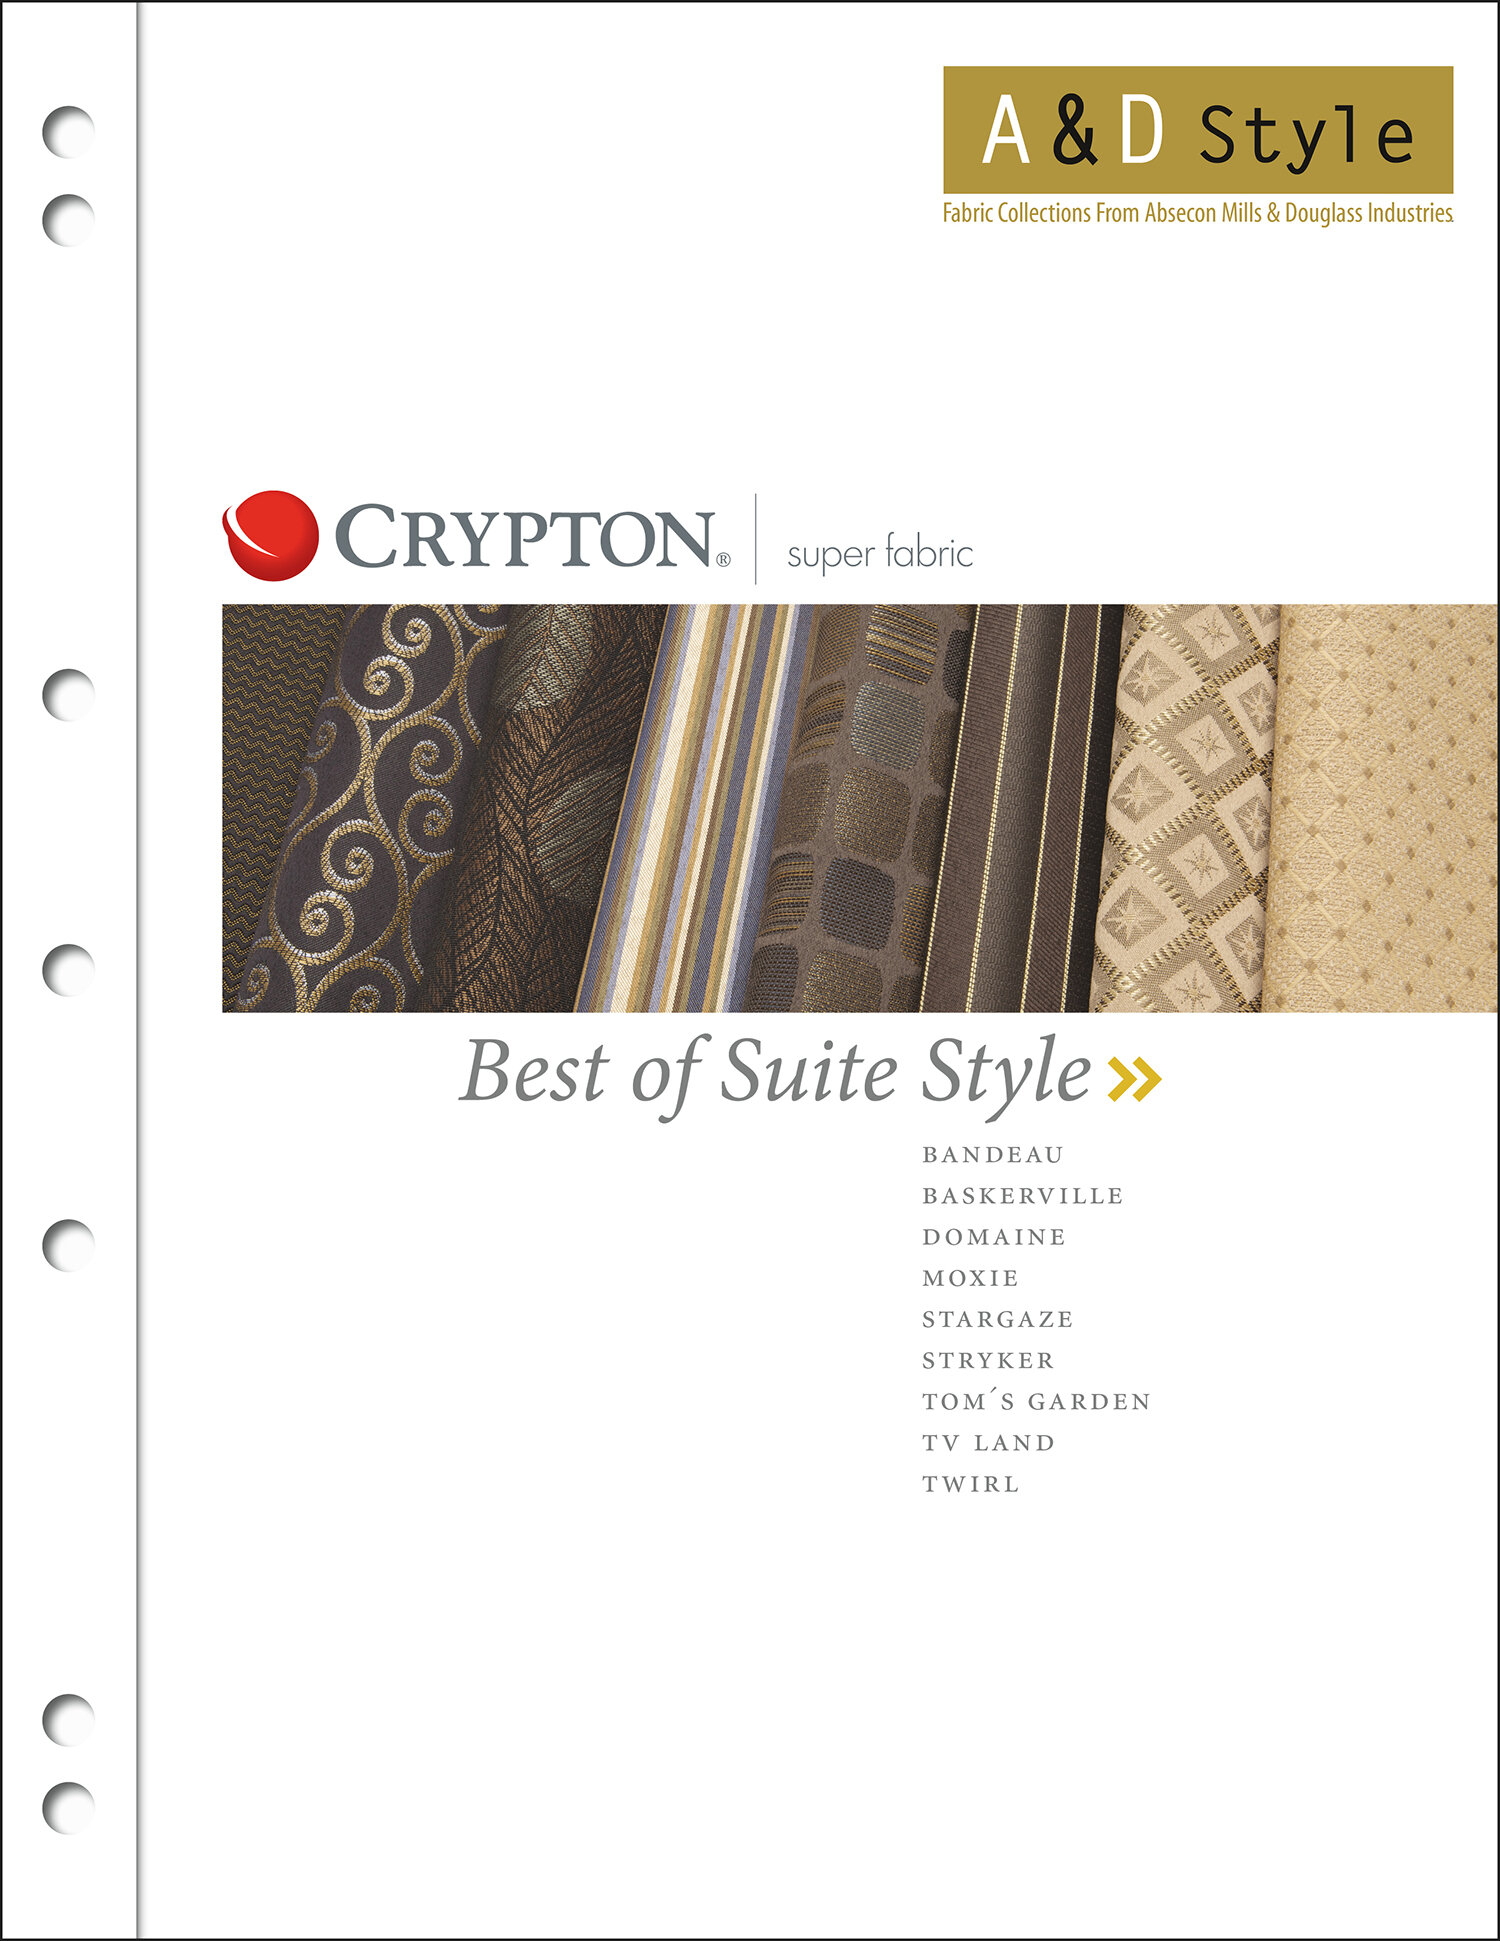 Best of Suite Style Cover Image.jpg